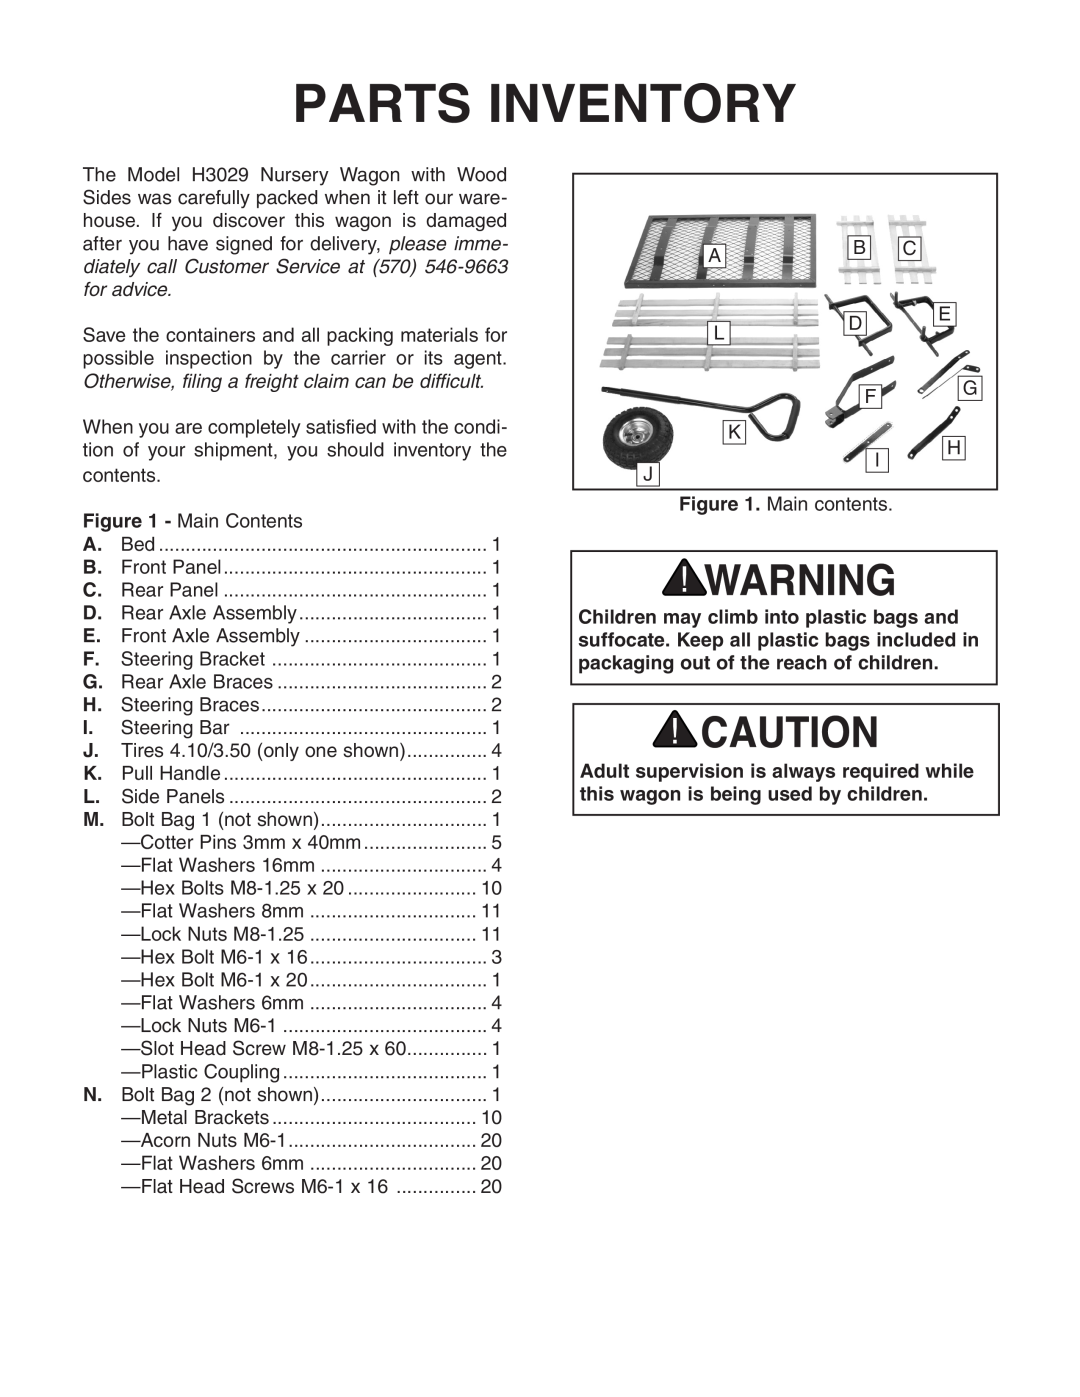 Grizzly H3029 instruction sheet Parts Inventory 